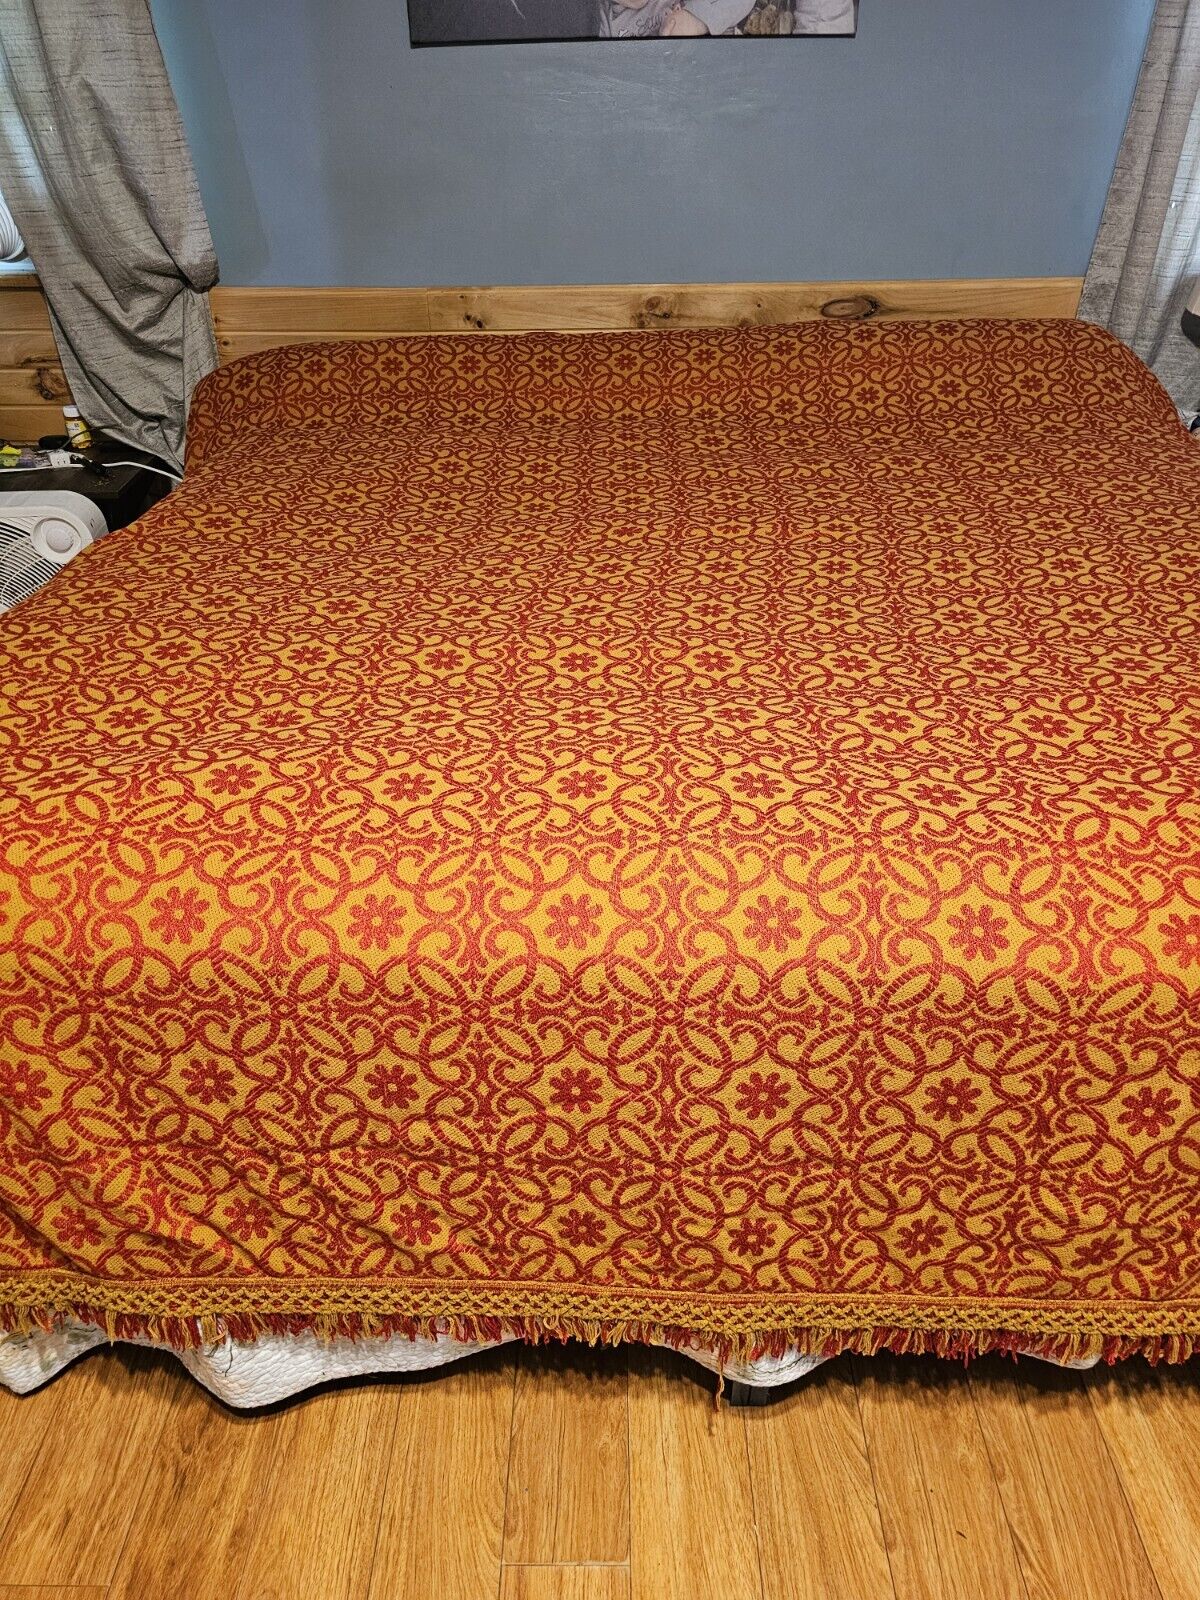 Vintage Retro Woven Bedspread Reddish Orange And Gold Tapestry Floral With...